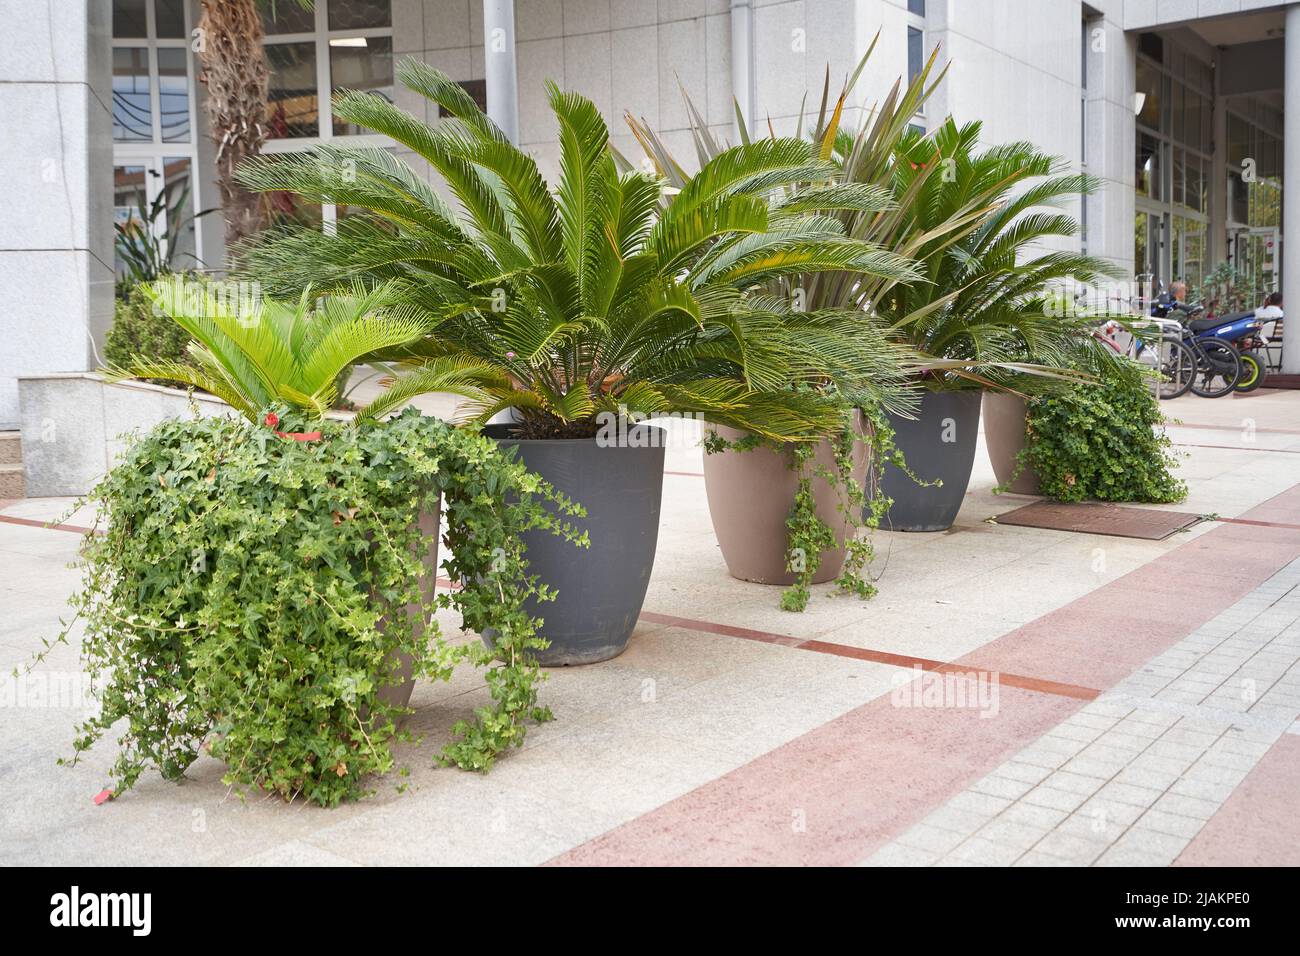 Cycas palm trees In large pots at the front of the building for landscaping  Stock Photo - Alamy